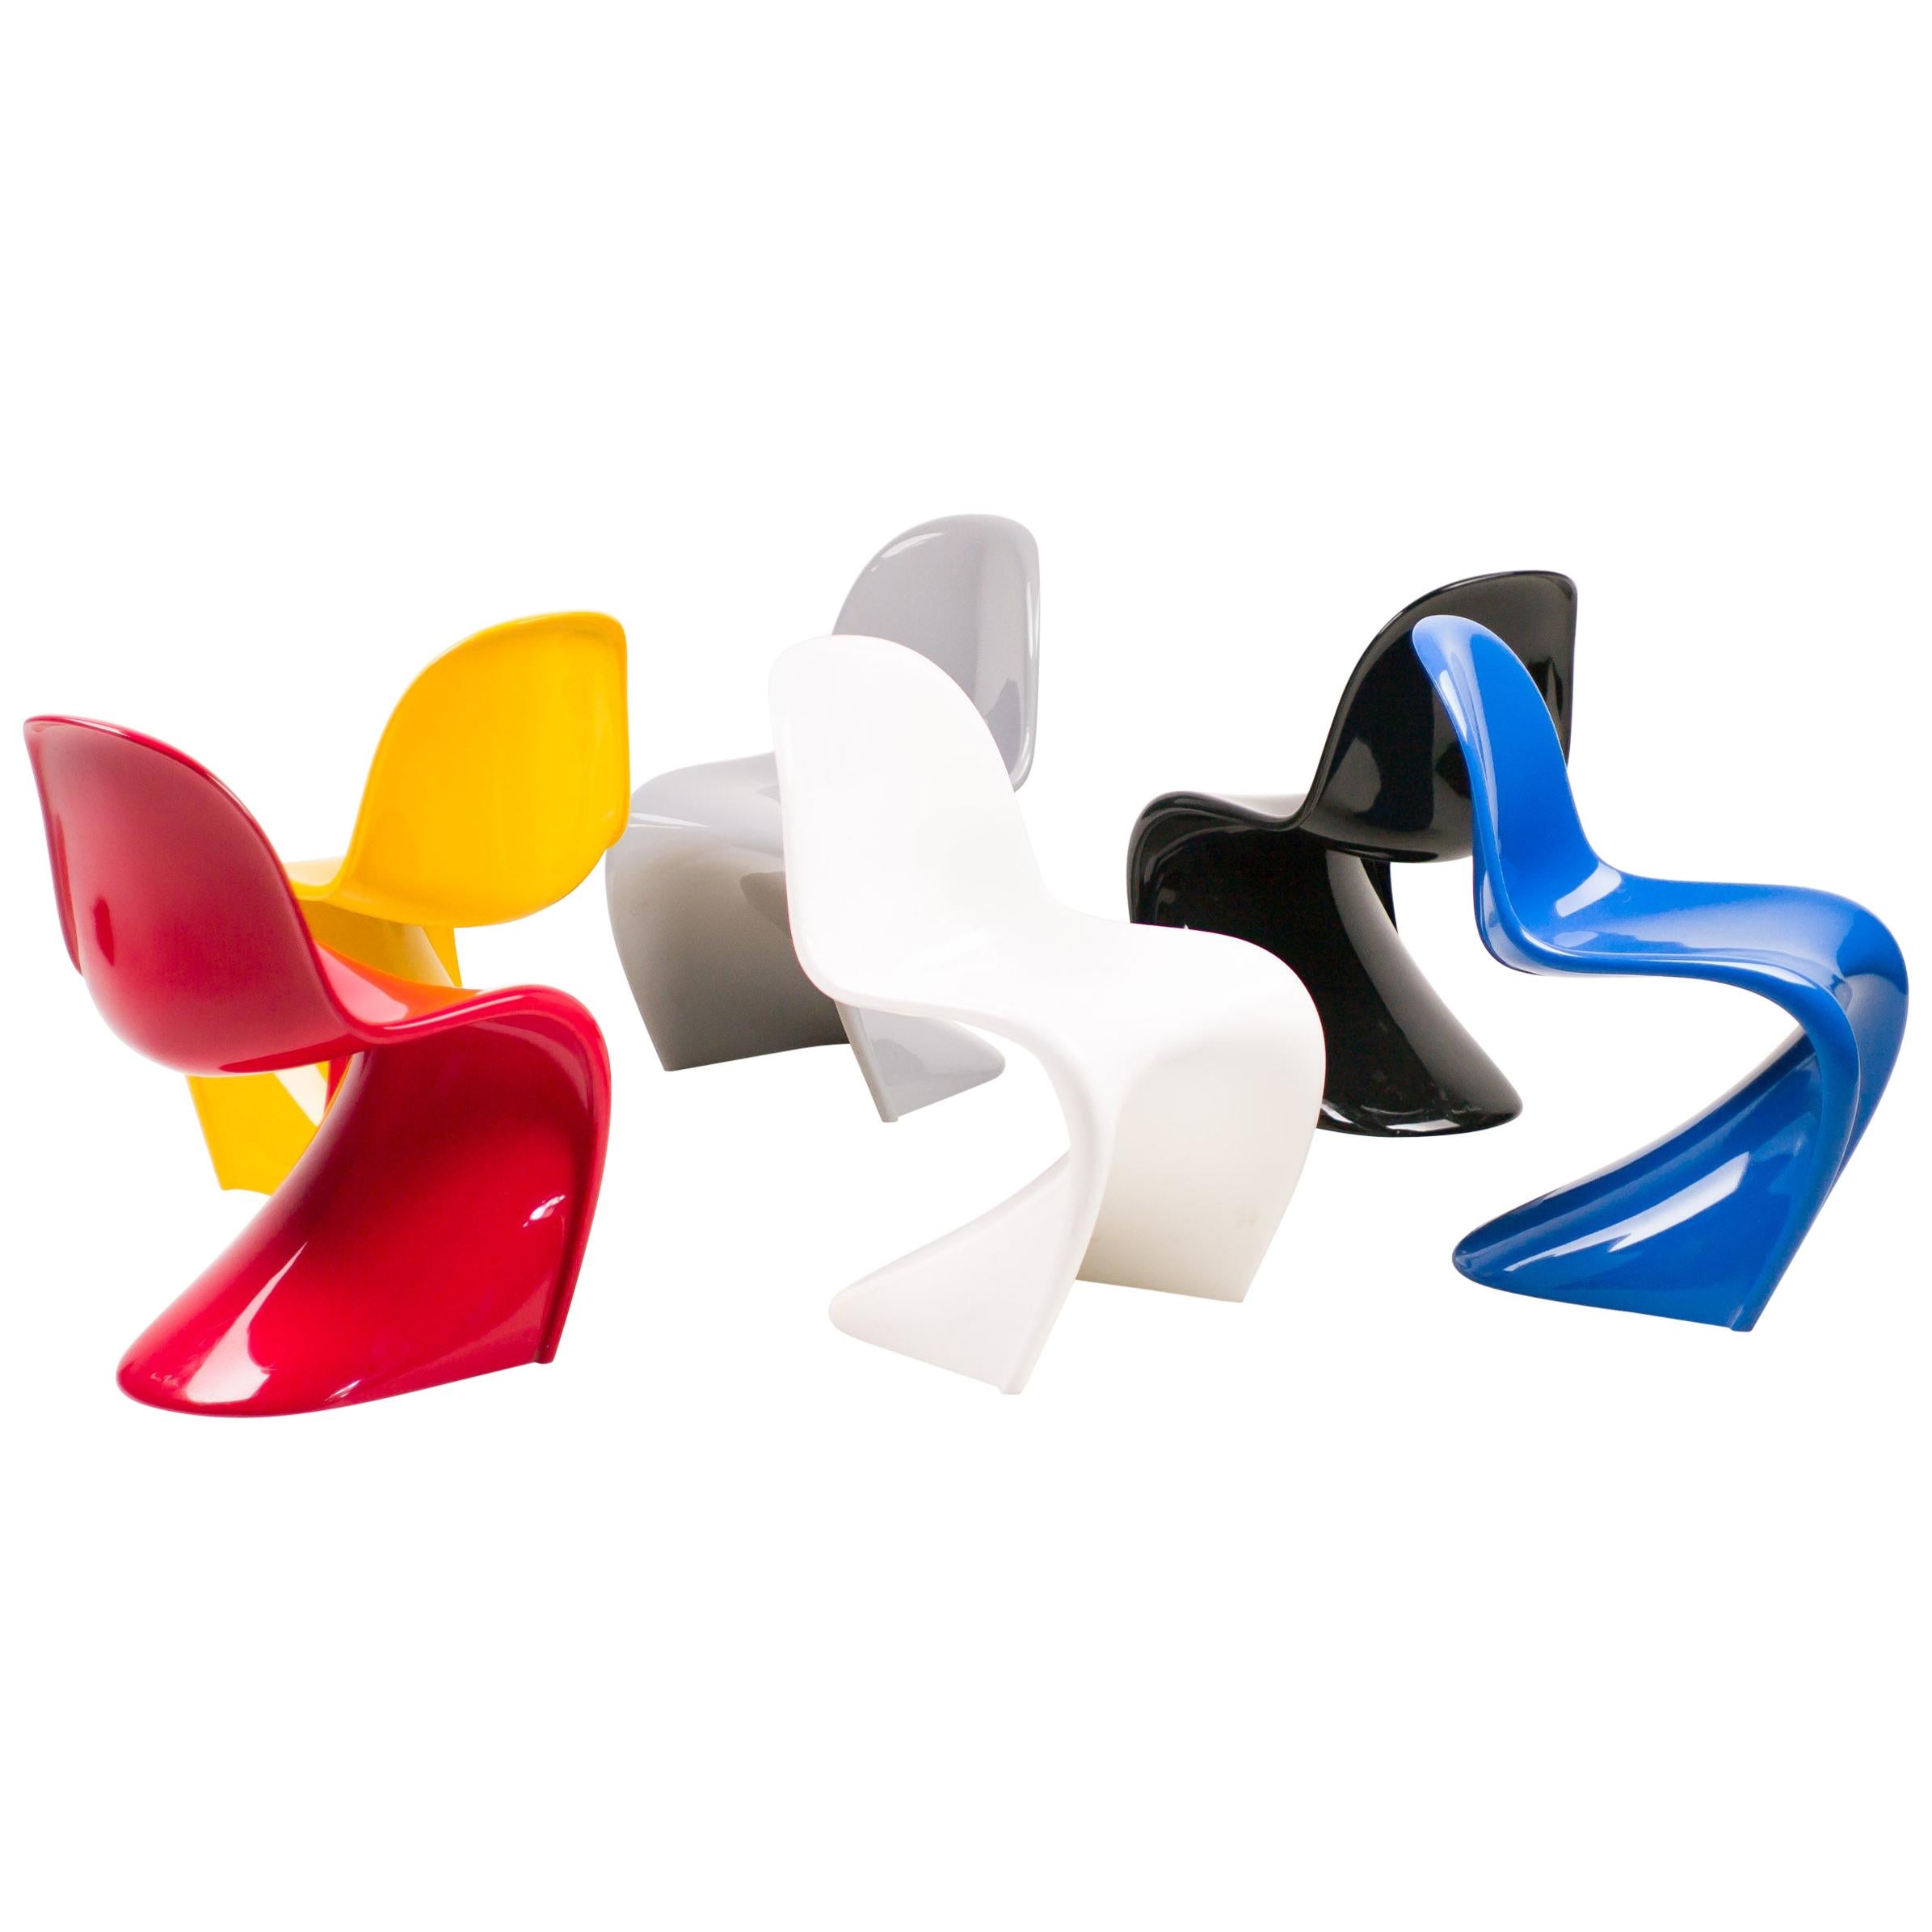 Set of Six Original Panton Chairs in Primary Colors